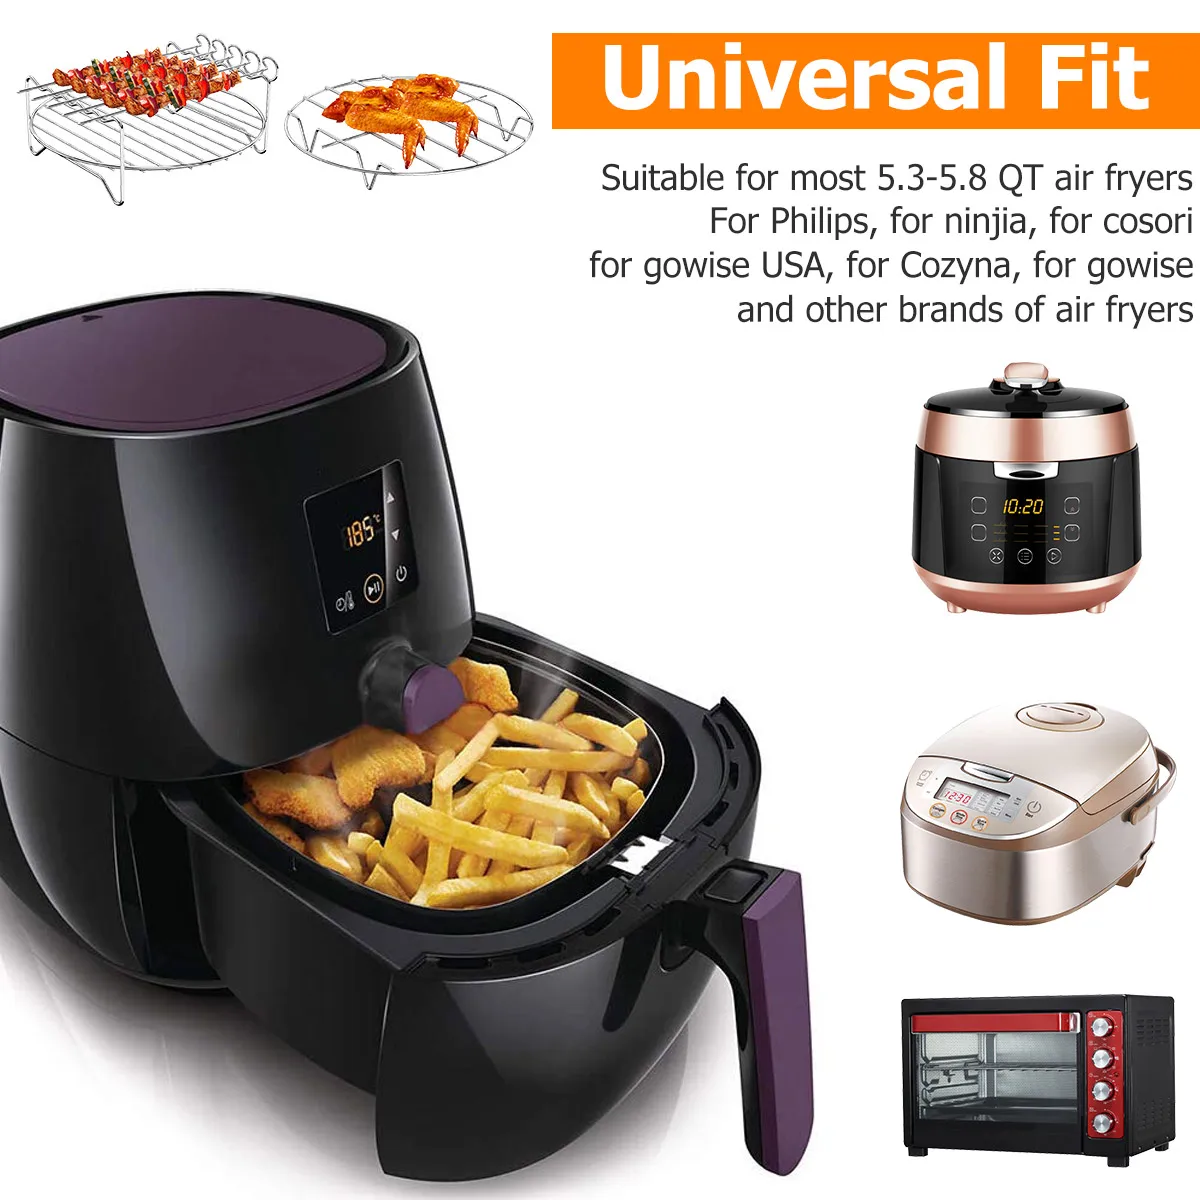 7 Inch / 8 Inch Accessories For Philips/GOWISEUSA/COZYNA/COSORI/Ninjia and  All Air Fryers 3.7QT to 5.8QT